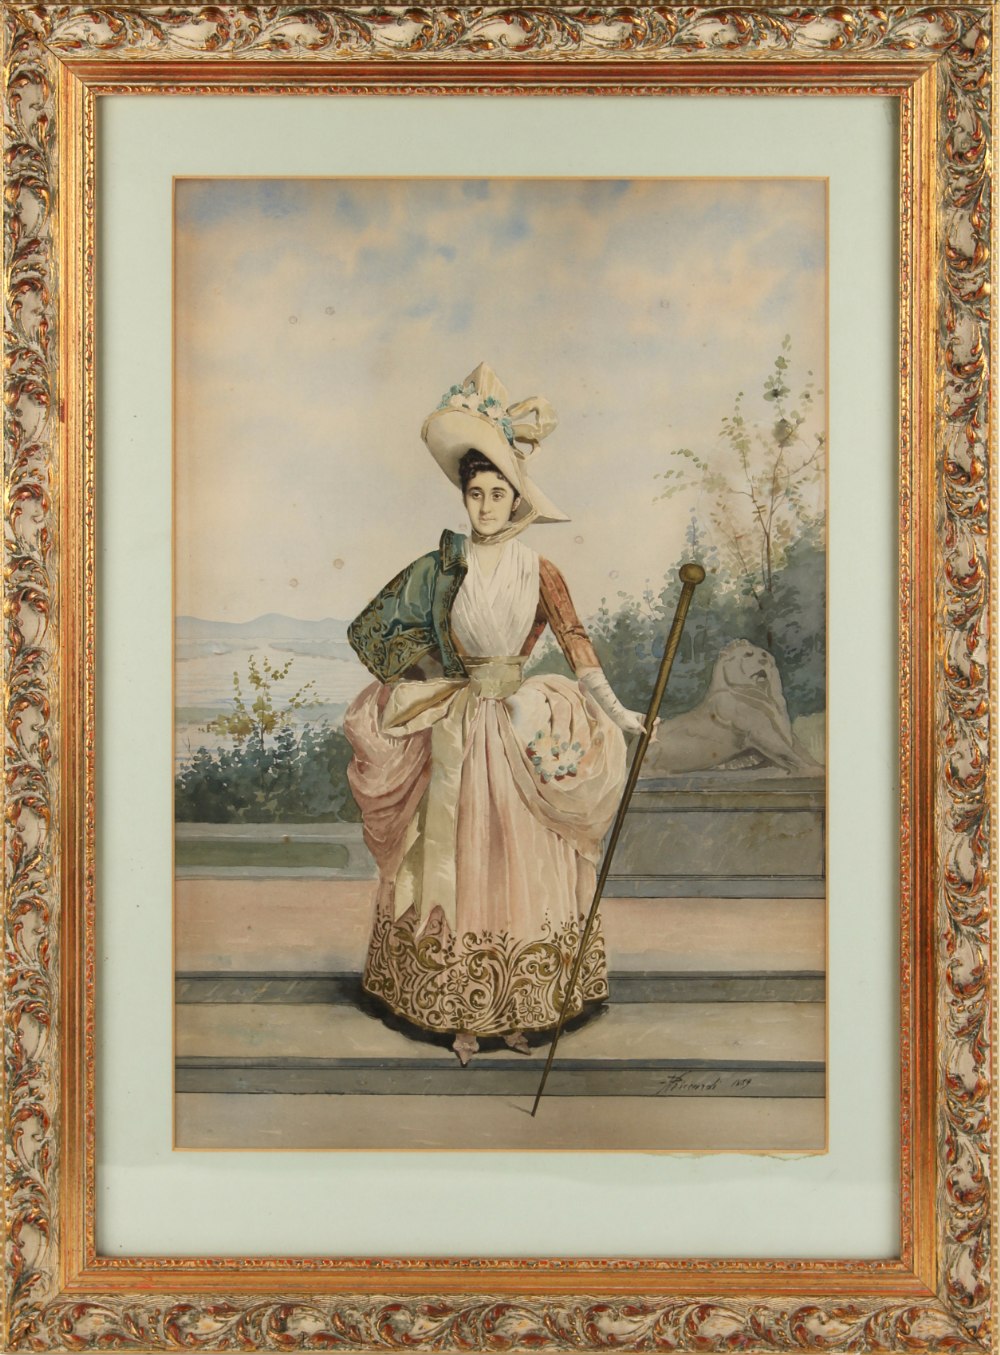 Property of a gentleman - Riccardi (late 19th century) - PORTRAIT OF A YOUNG LADY, MODELLED STANDING